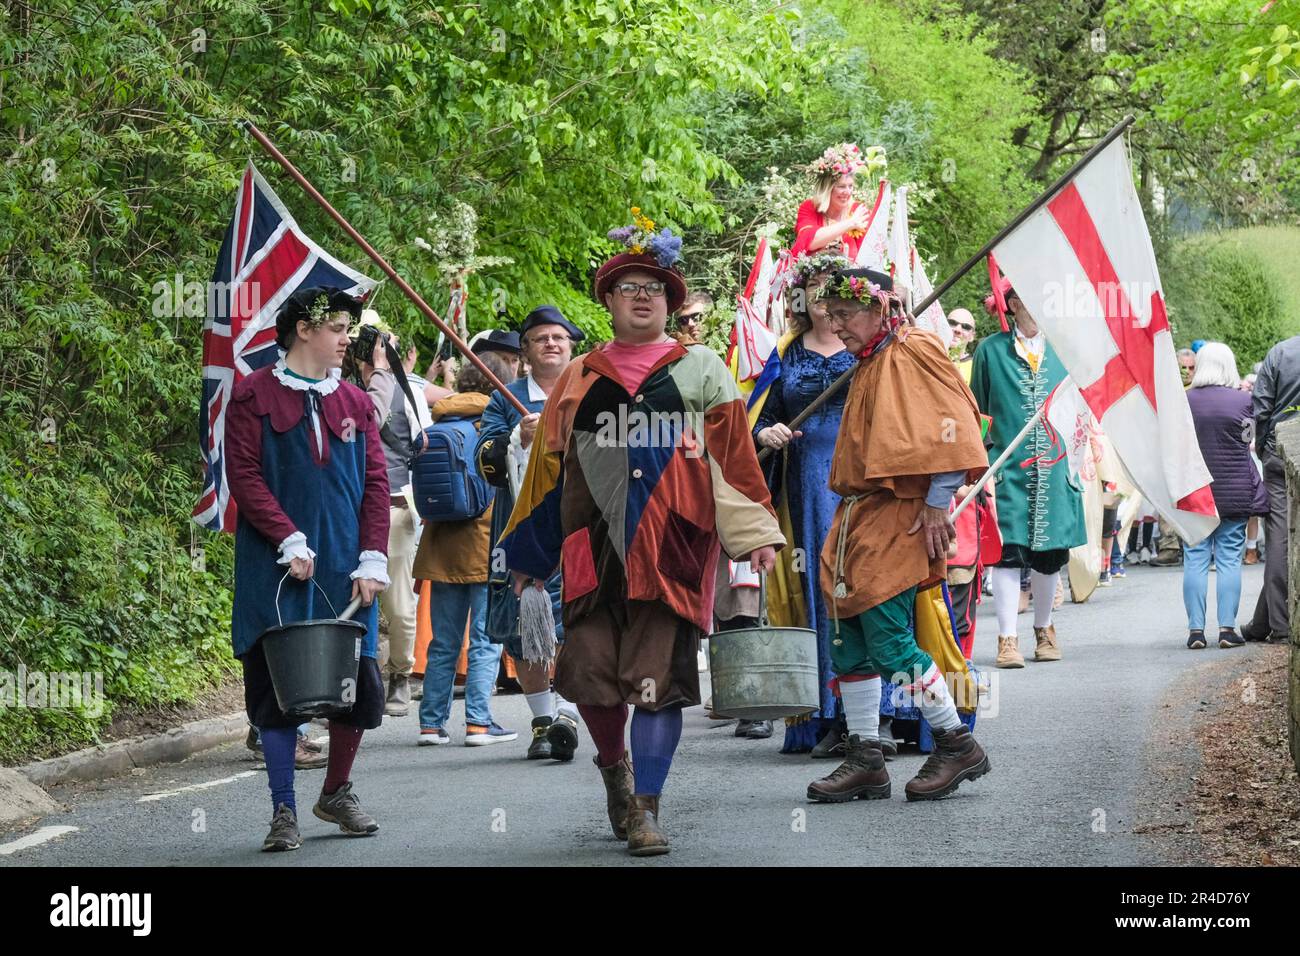 Randwick Wap, a cotswold villages traditional celecbration of spring.A small village near Stroud. Stock Photo